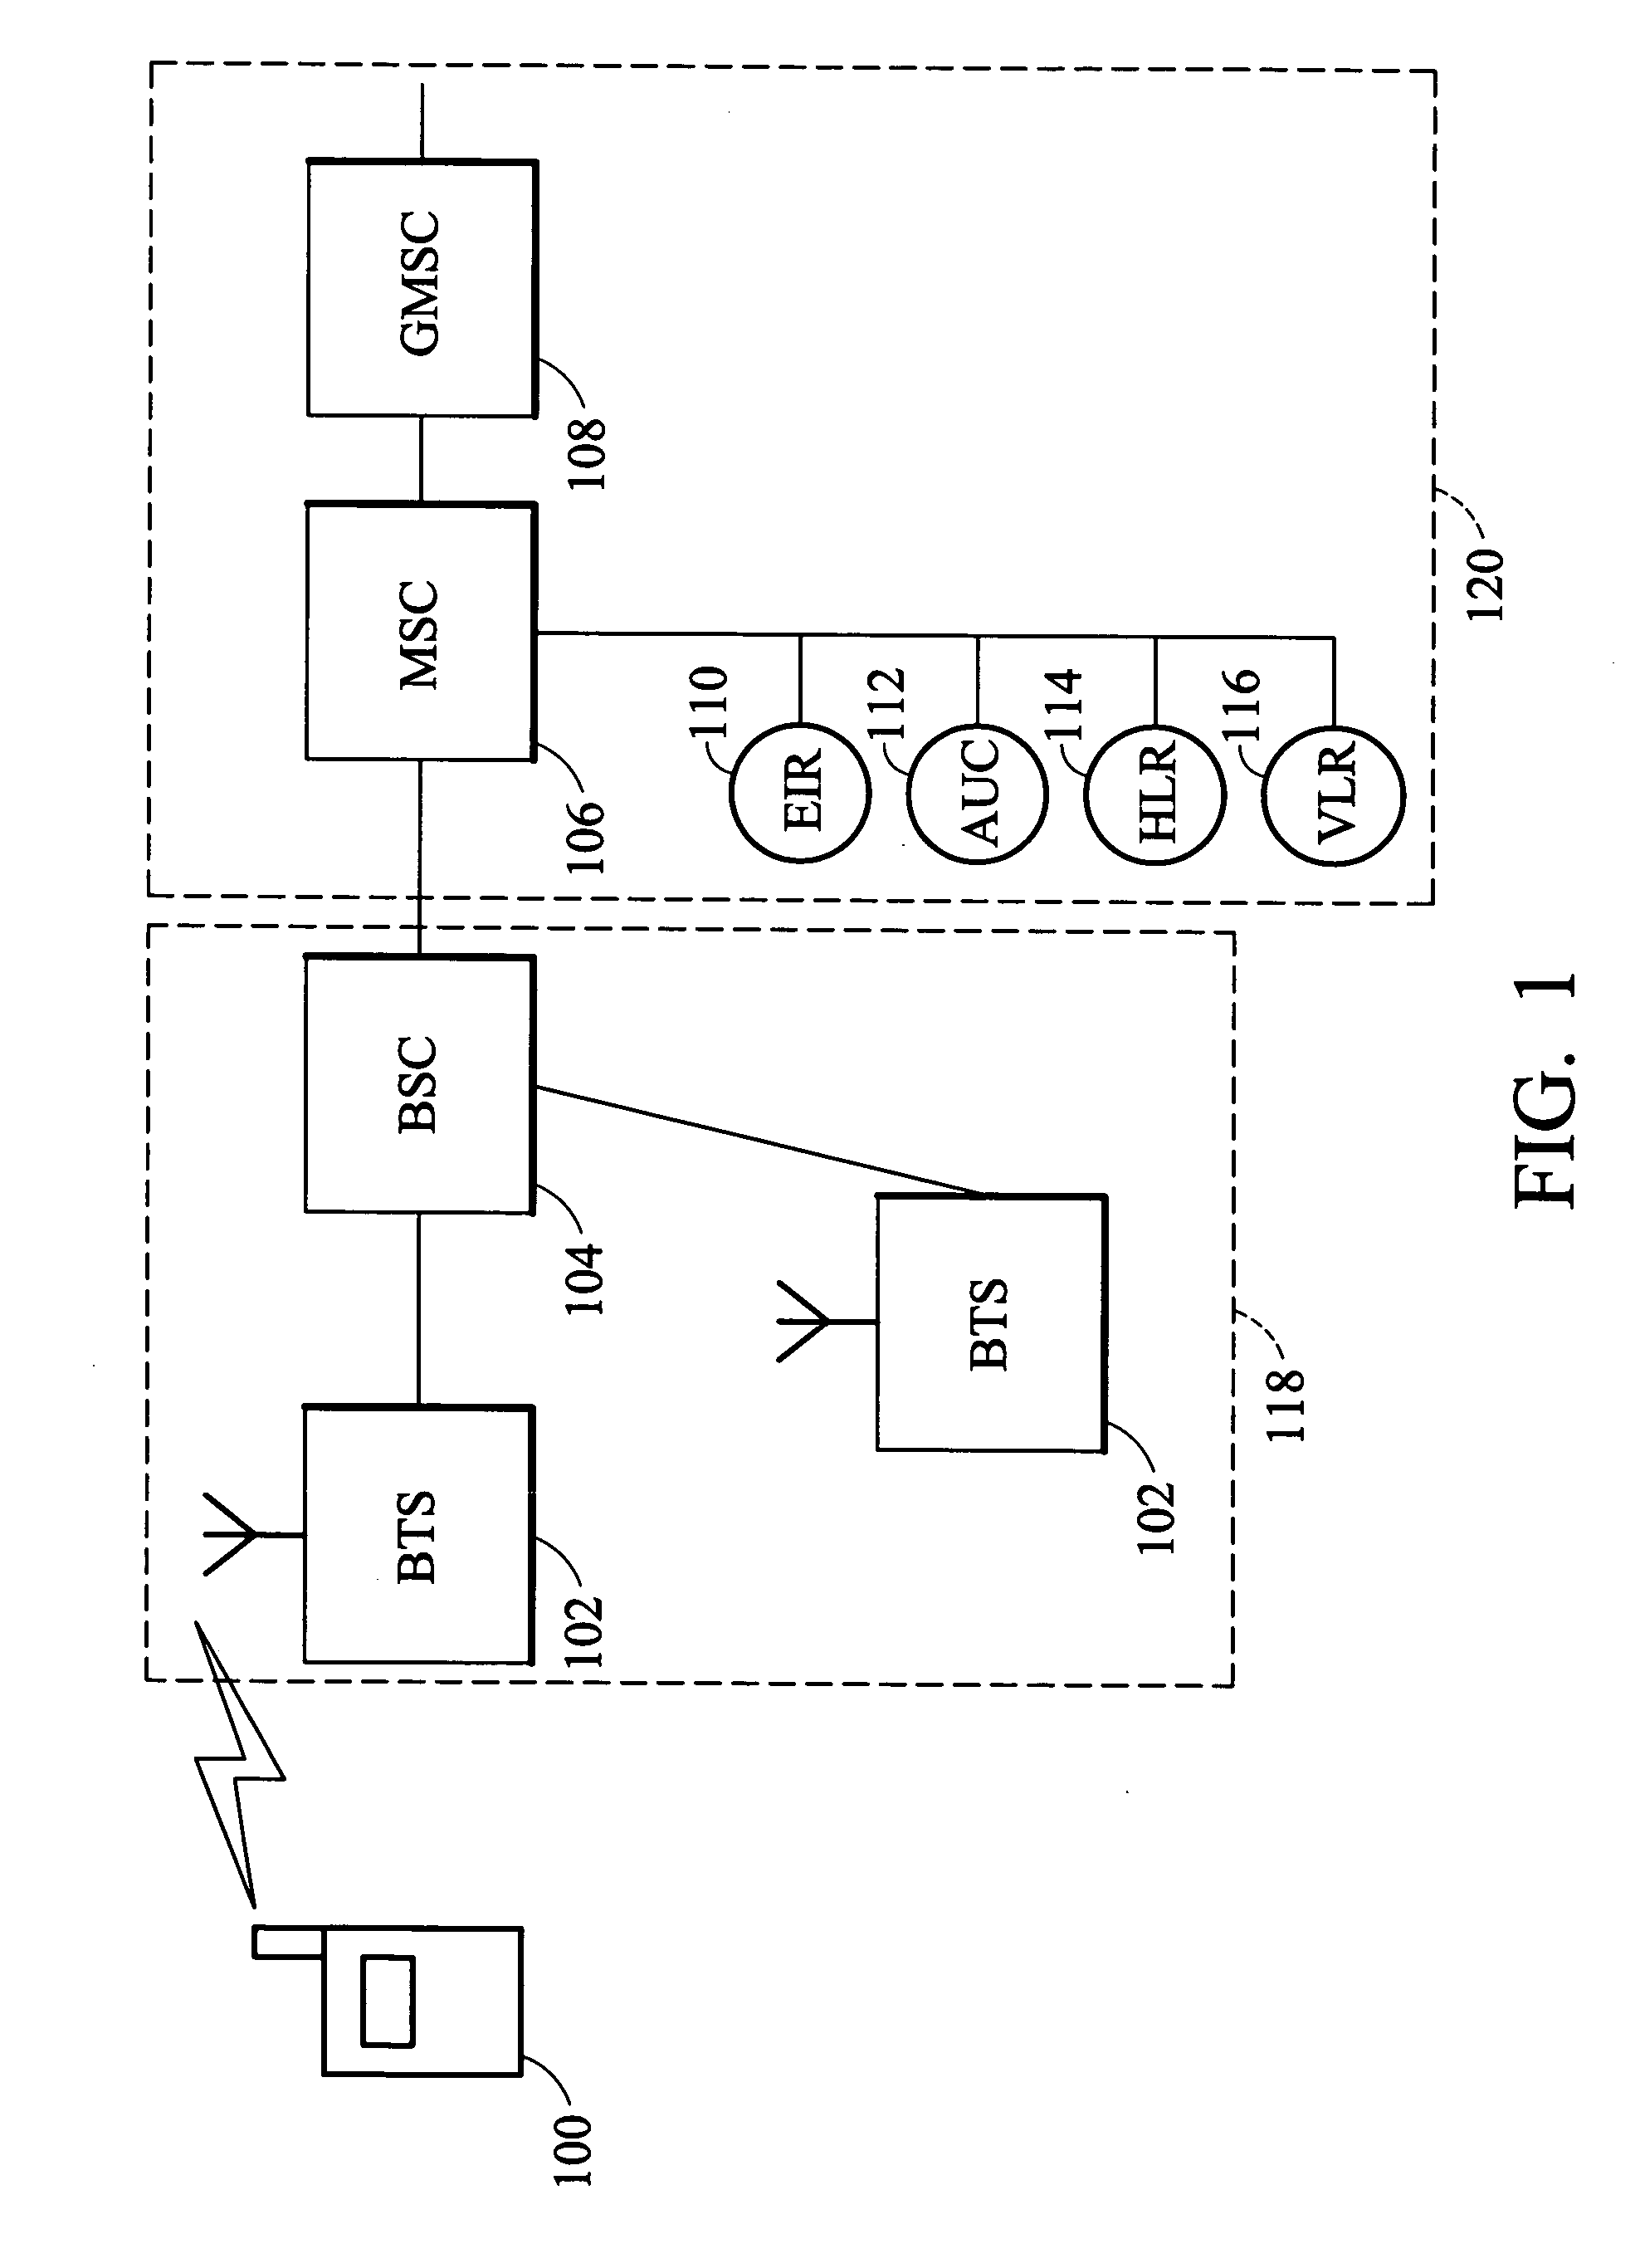 Delta-phase detection method and system